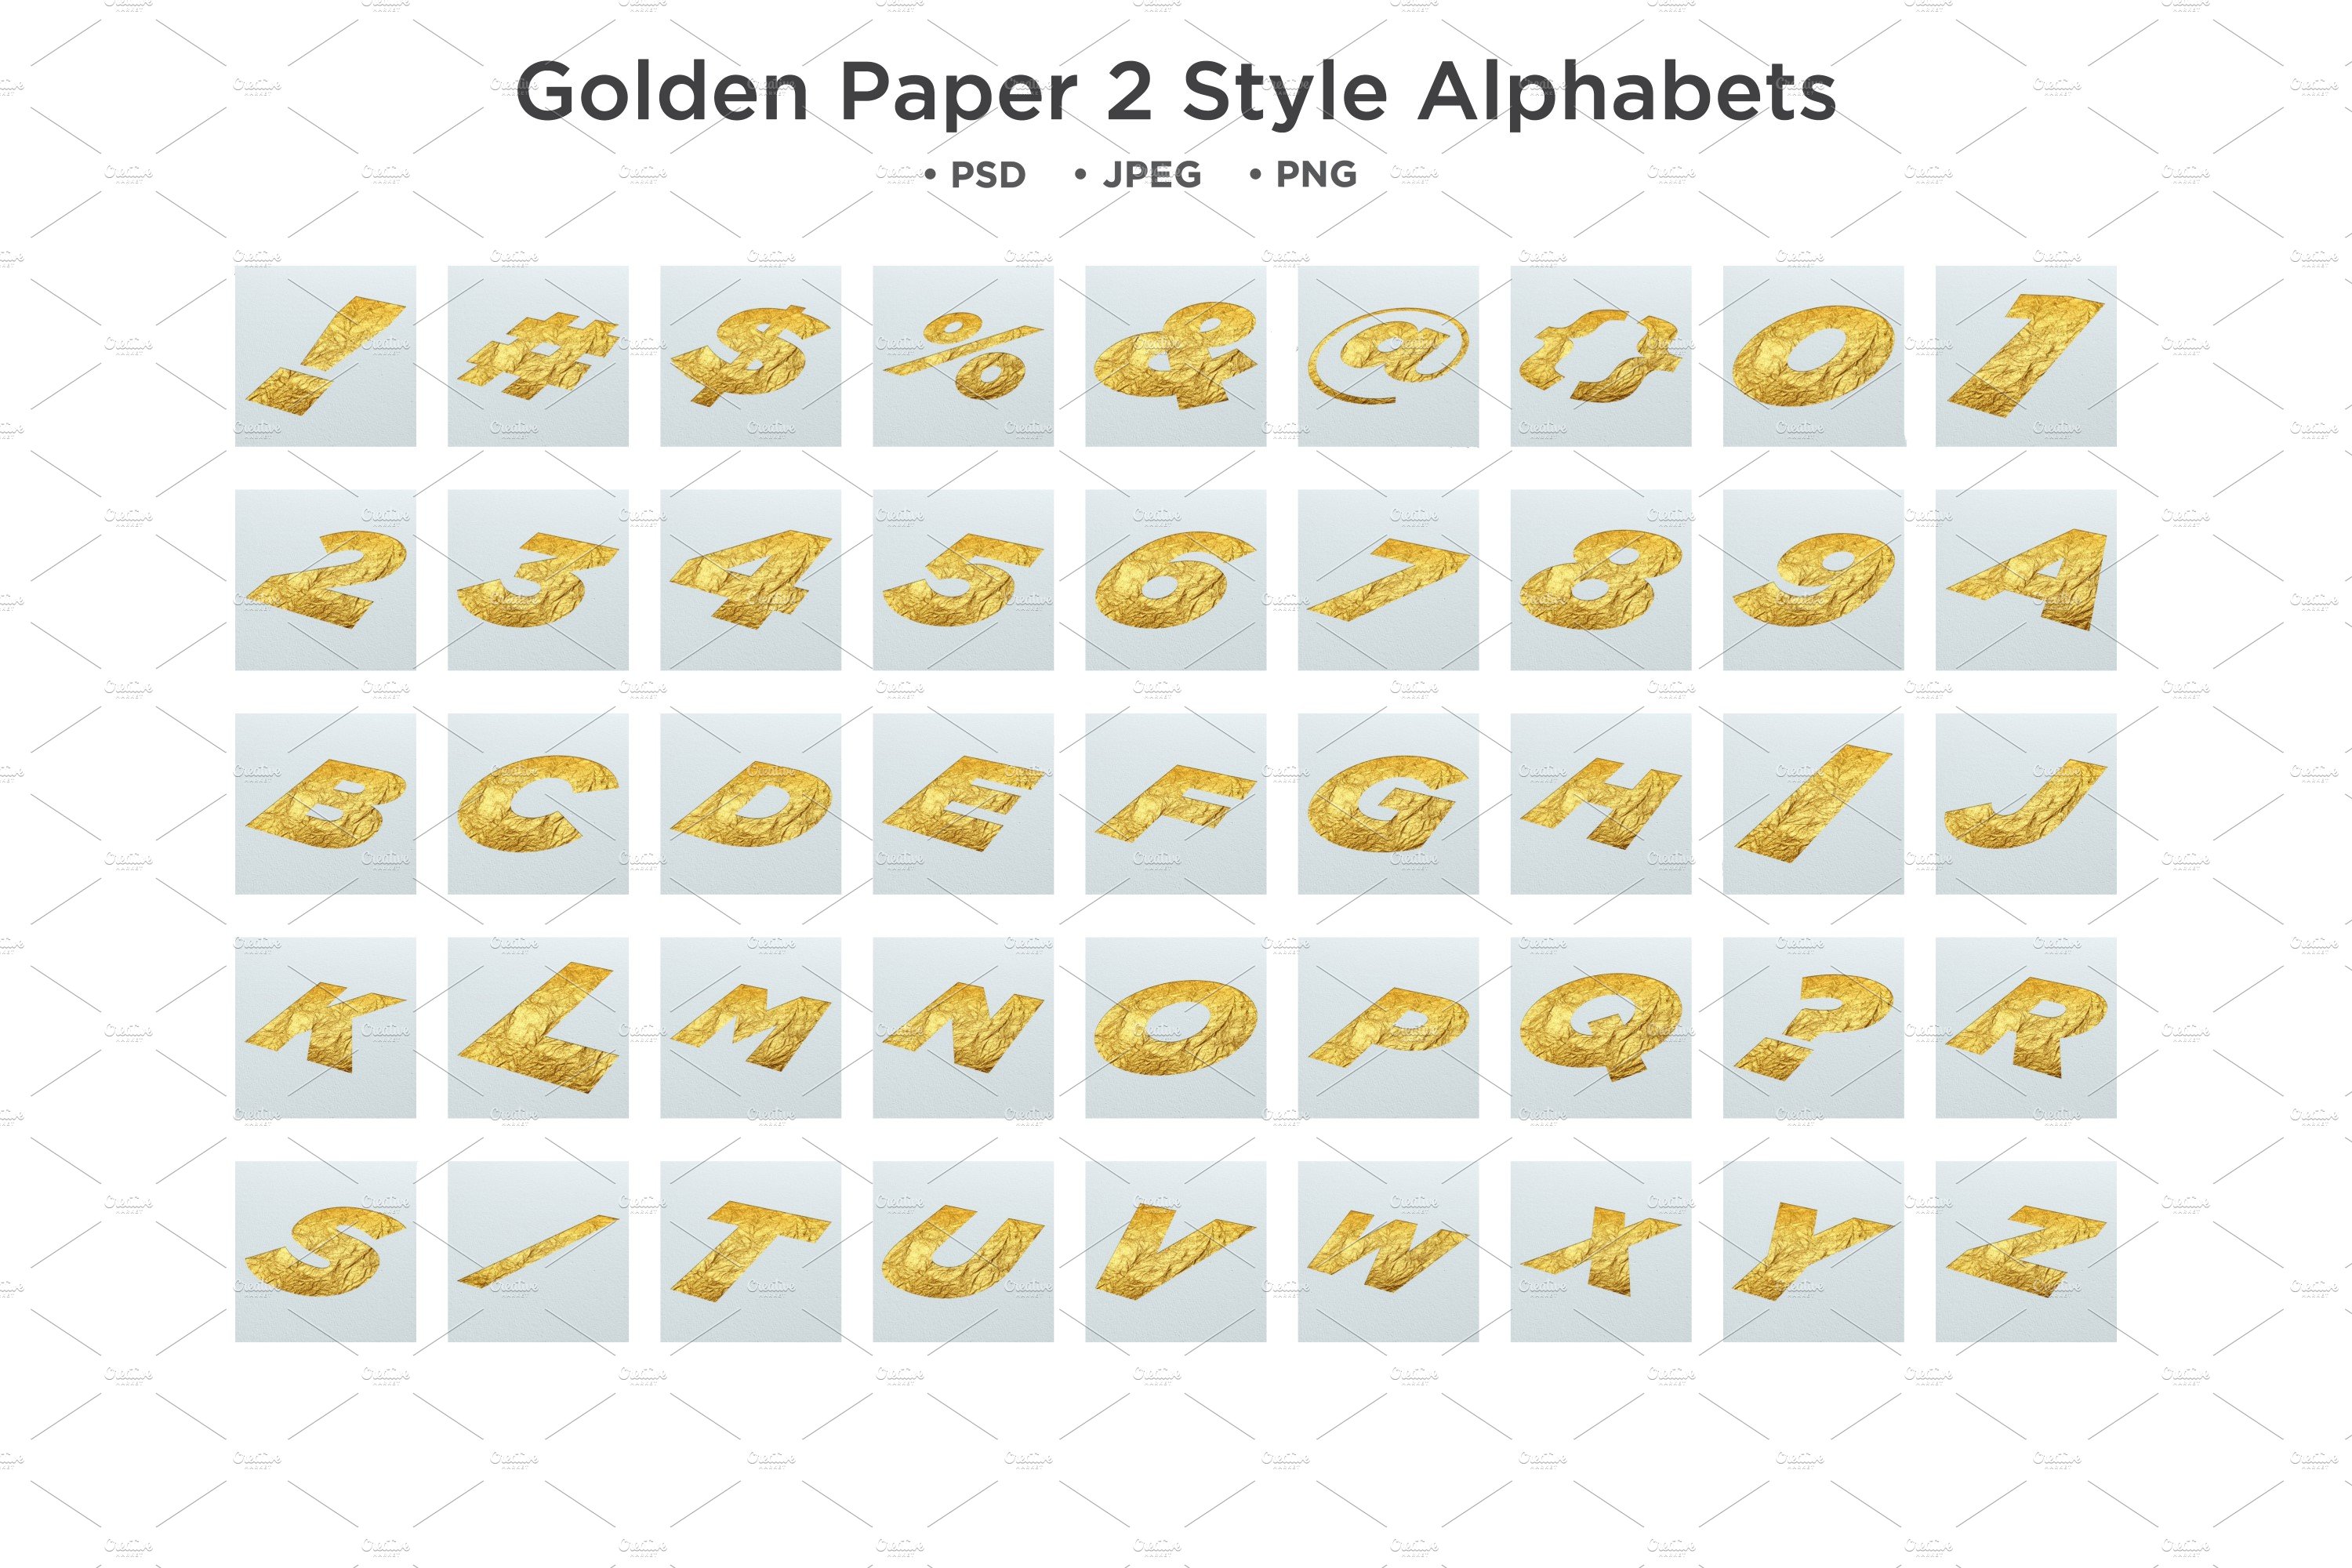 Golden Paper 2 Alphabet  Typographycover image.